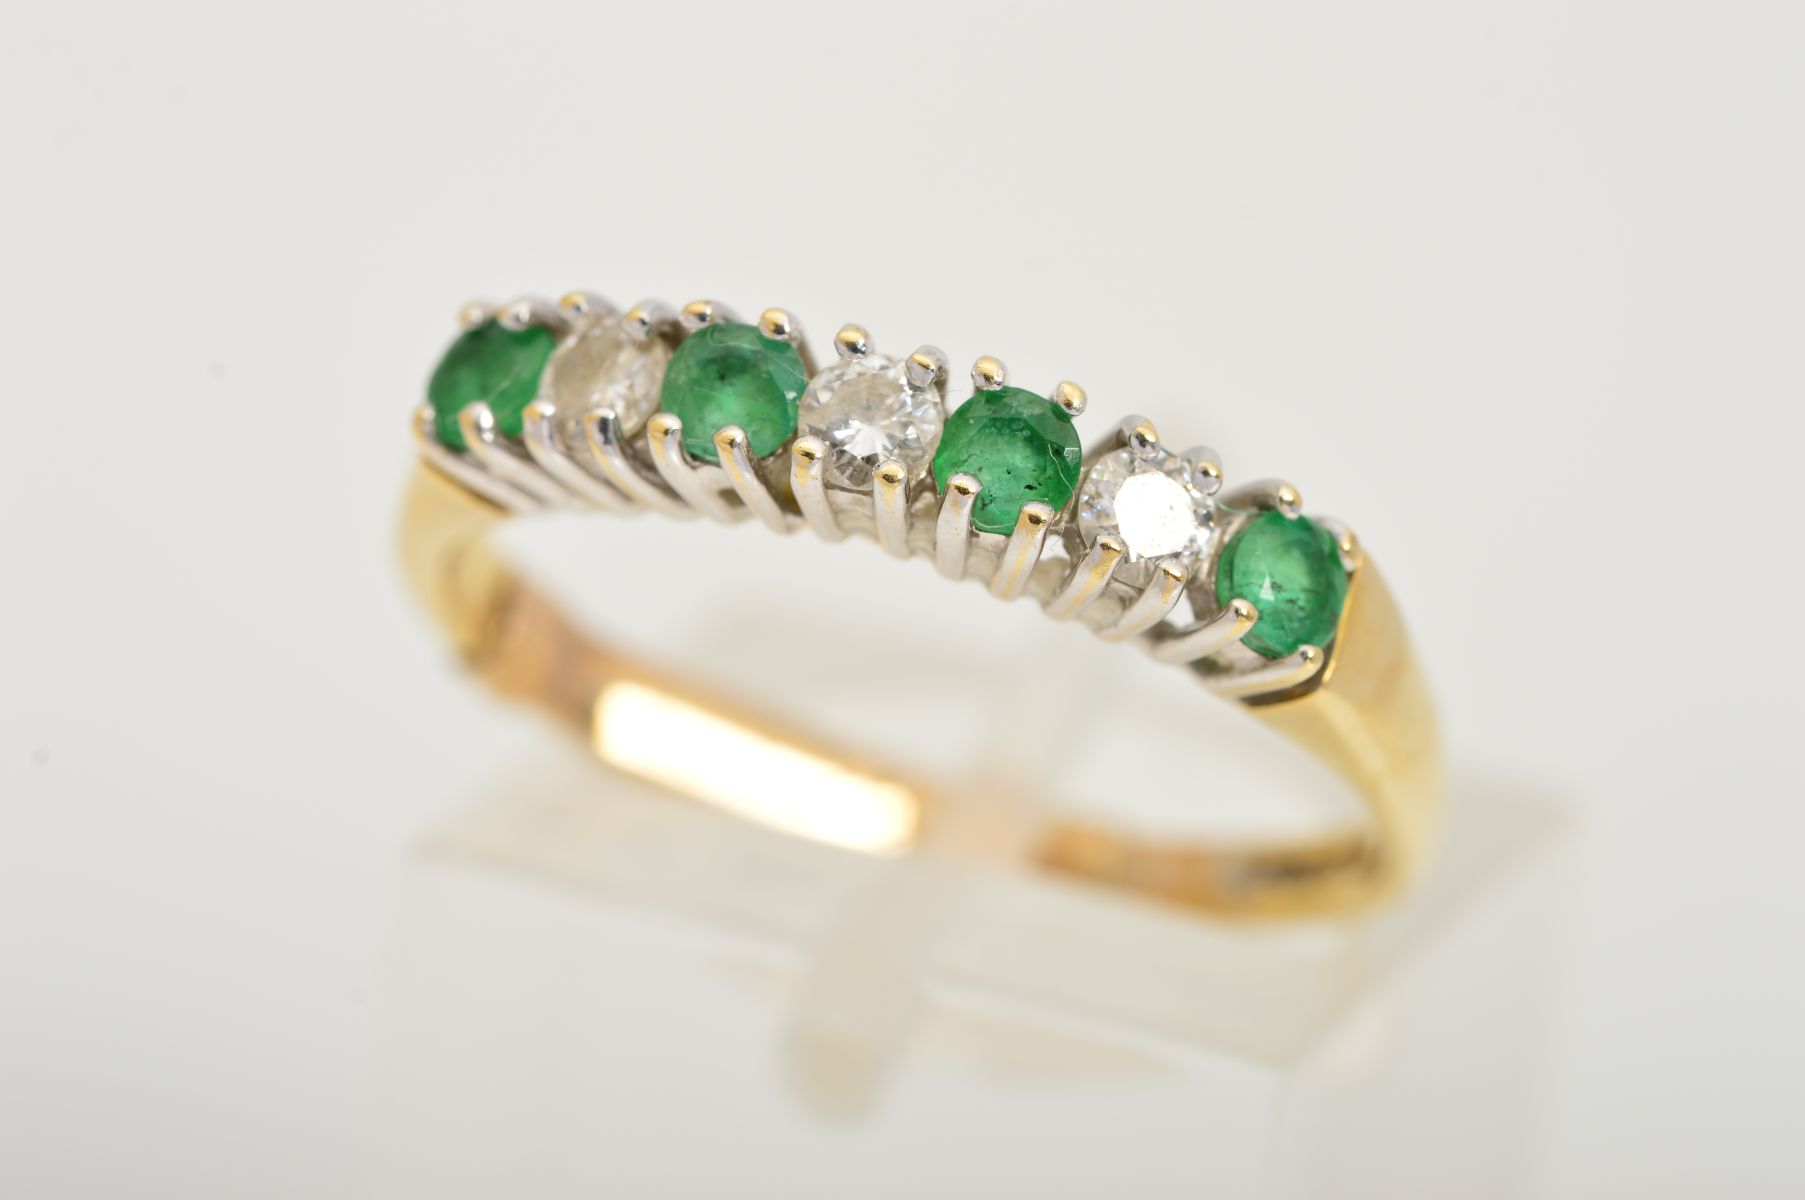 AN 18CT GOLD EMERALD AND DIAMOND RING, designed as a row of four circular emeralds interspaced by